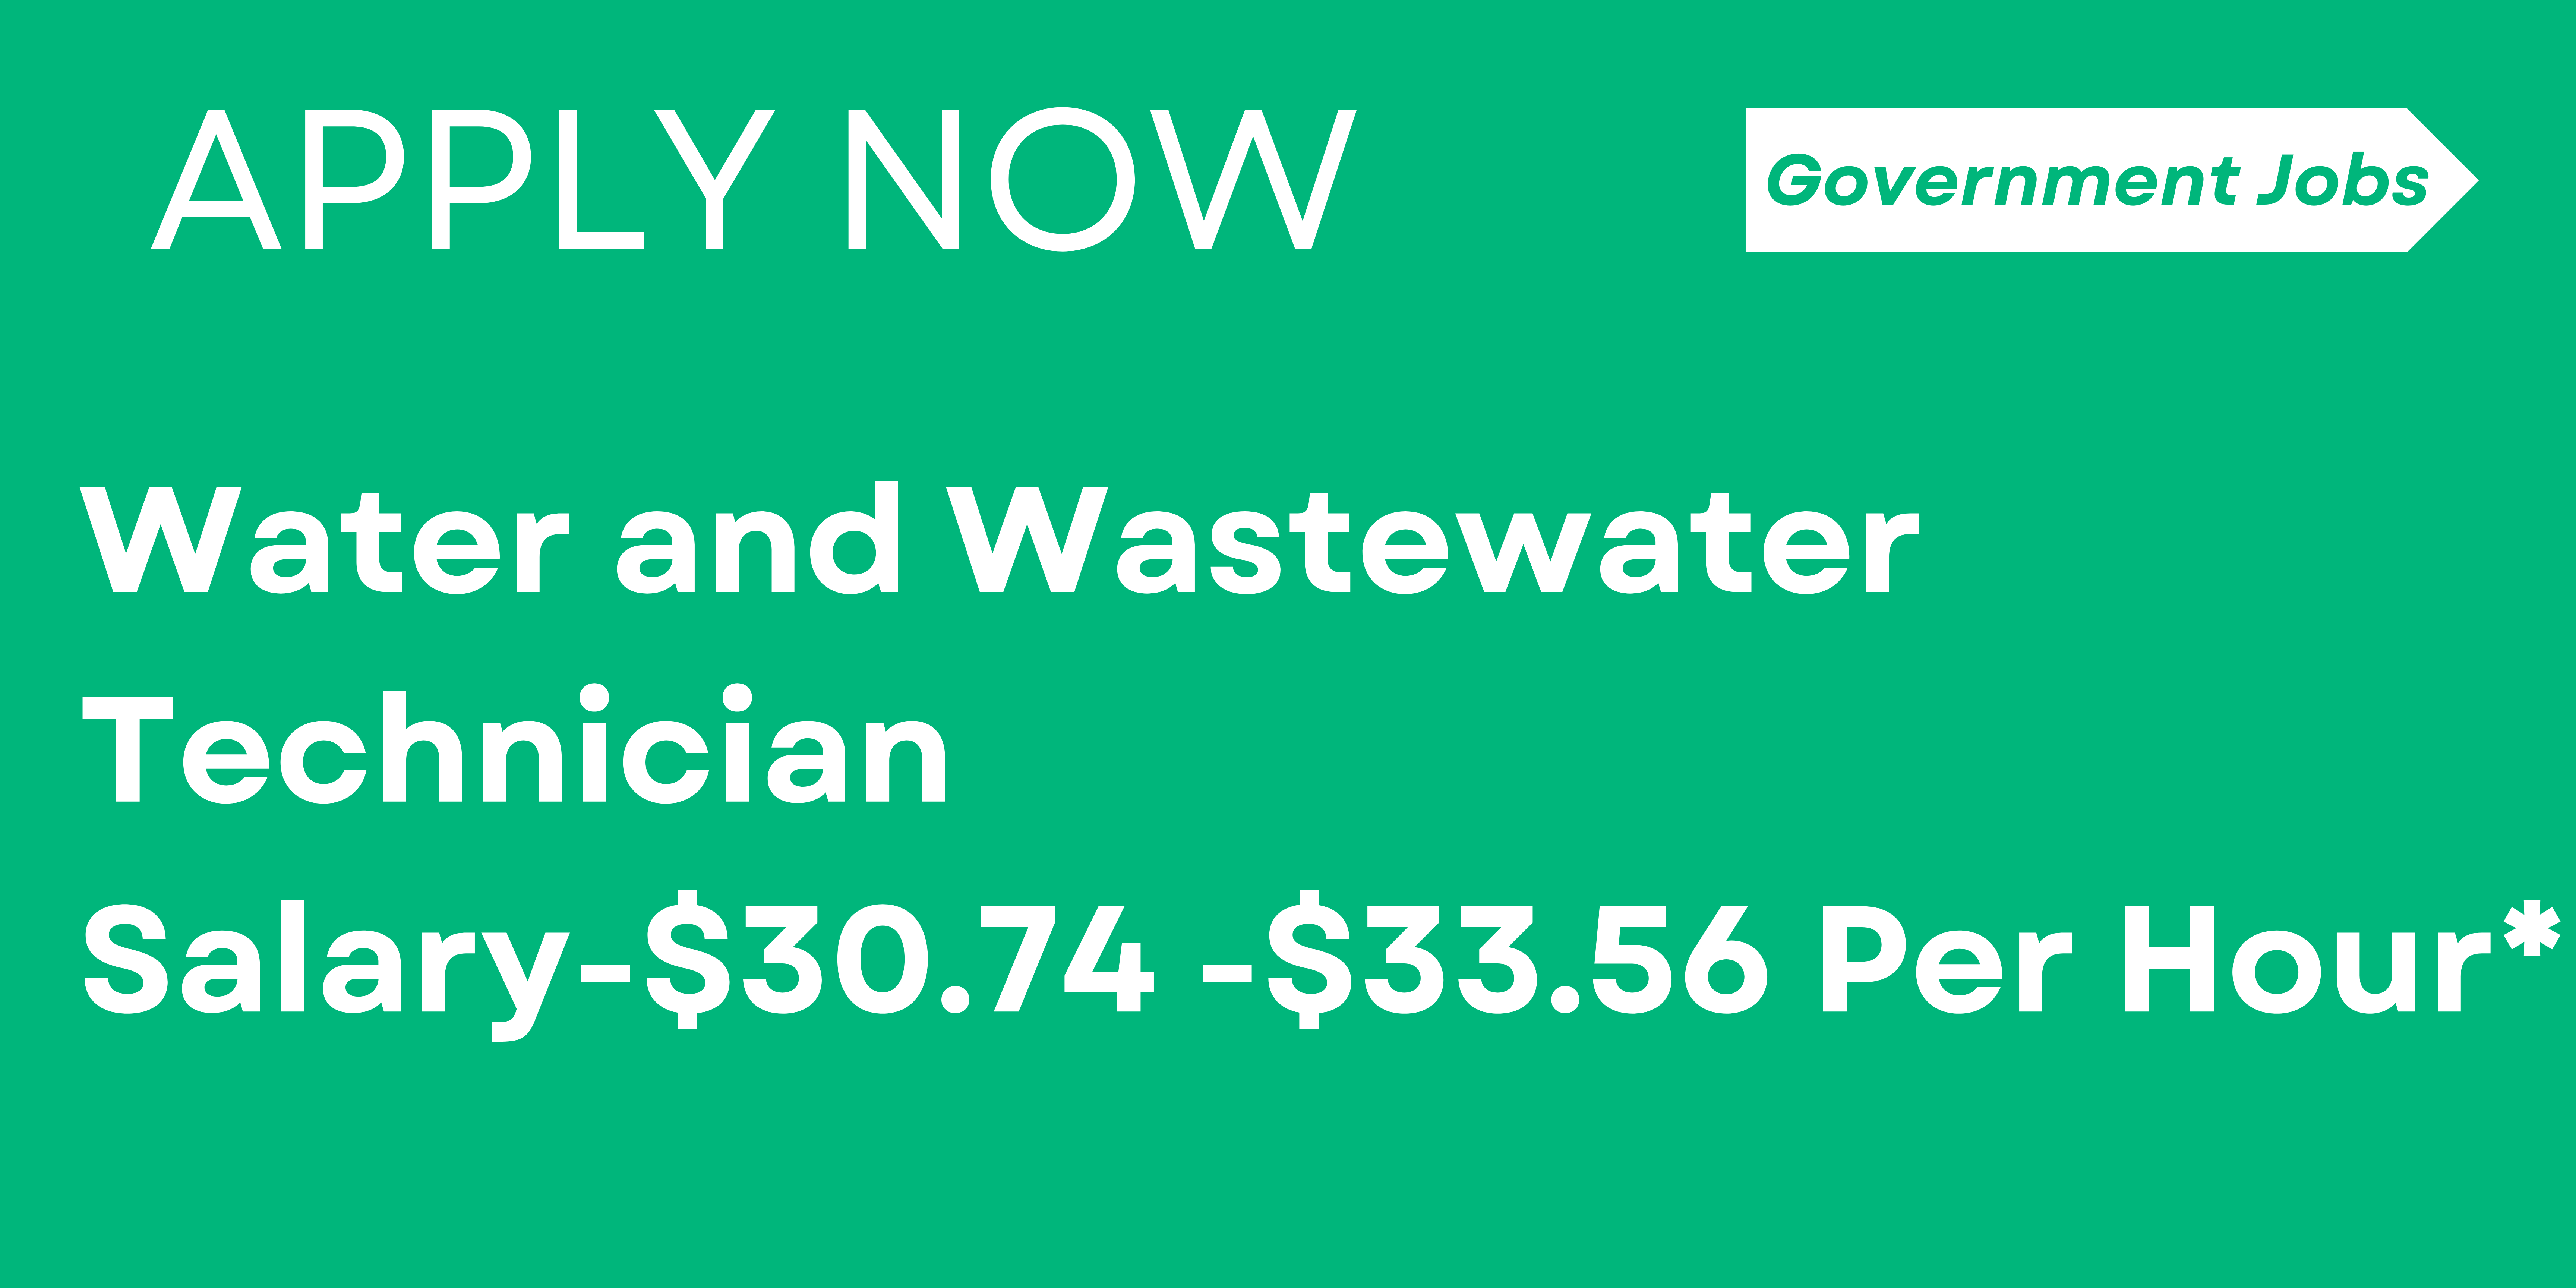 Water and Wastewater Technician